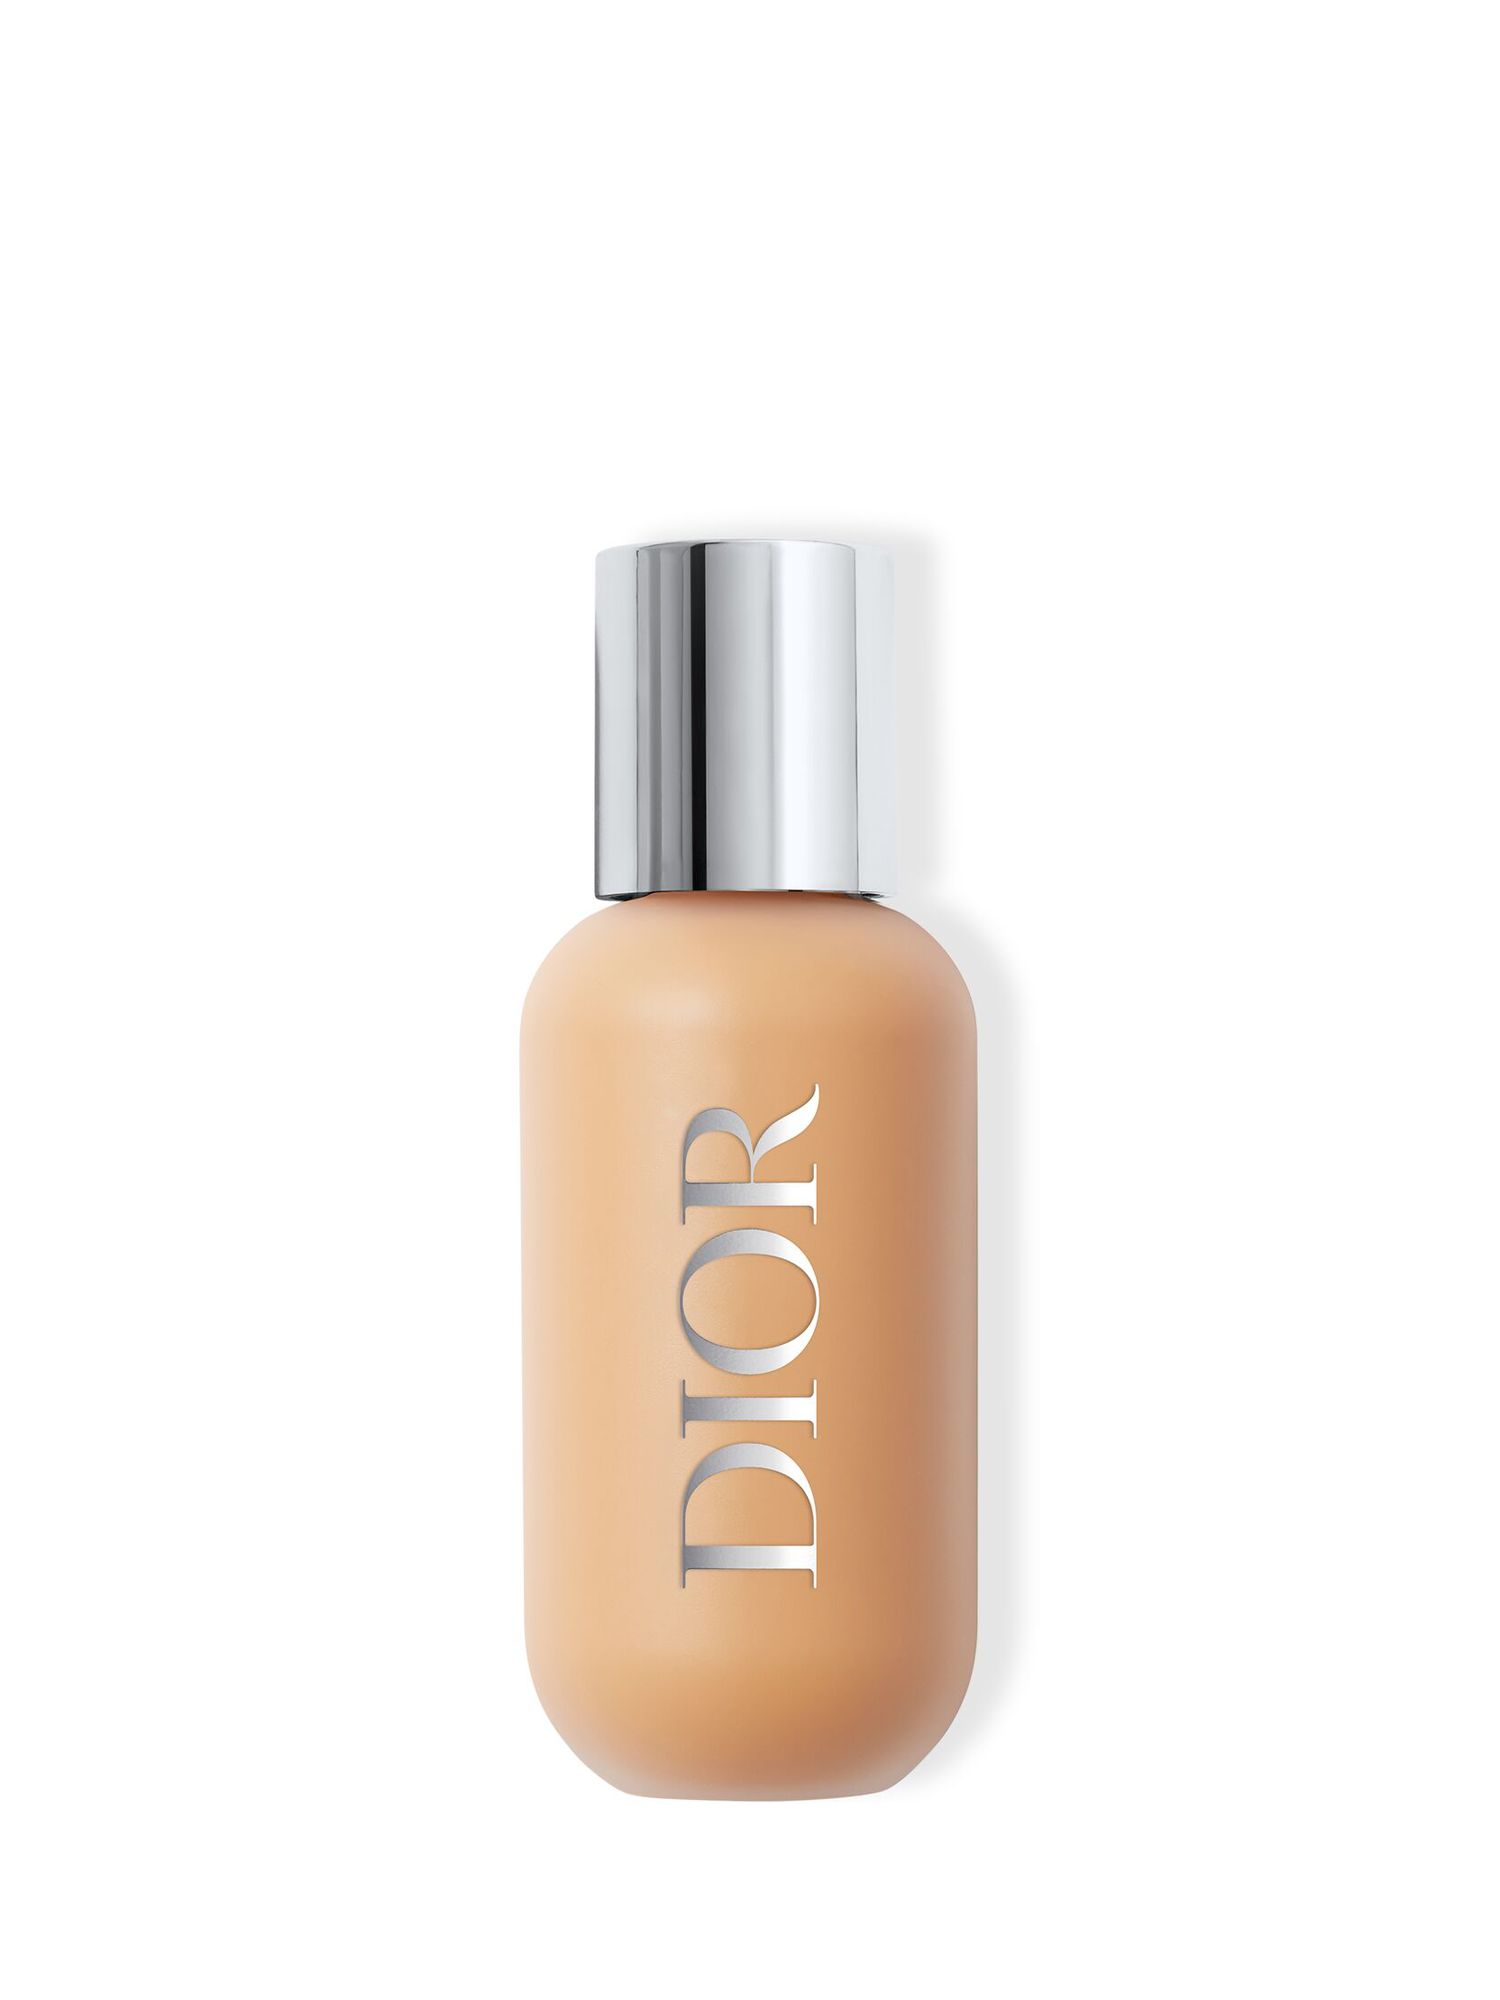 DIOR Backstage Face & Body Foundation, 4 5W at John Lewis & Partners